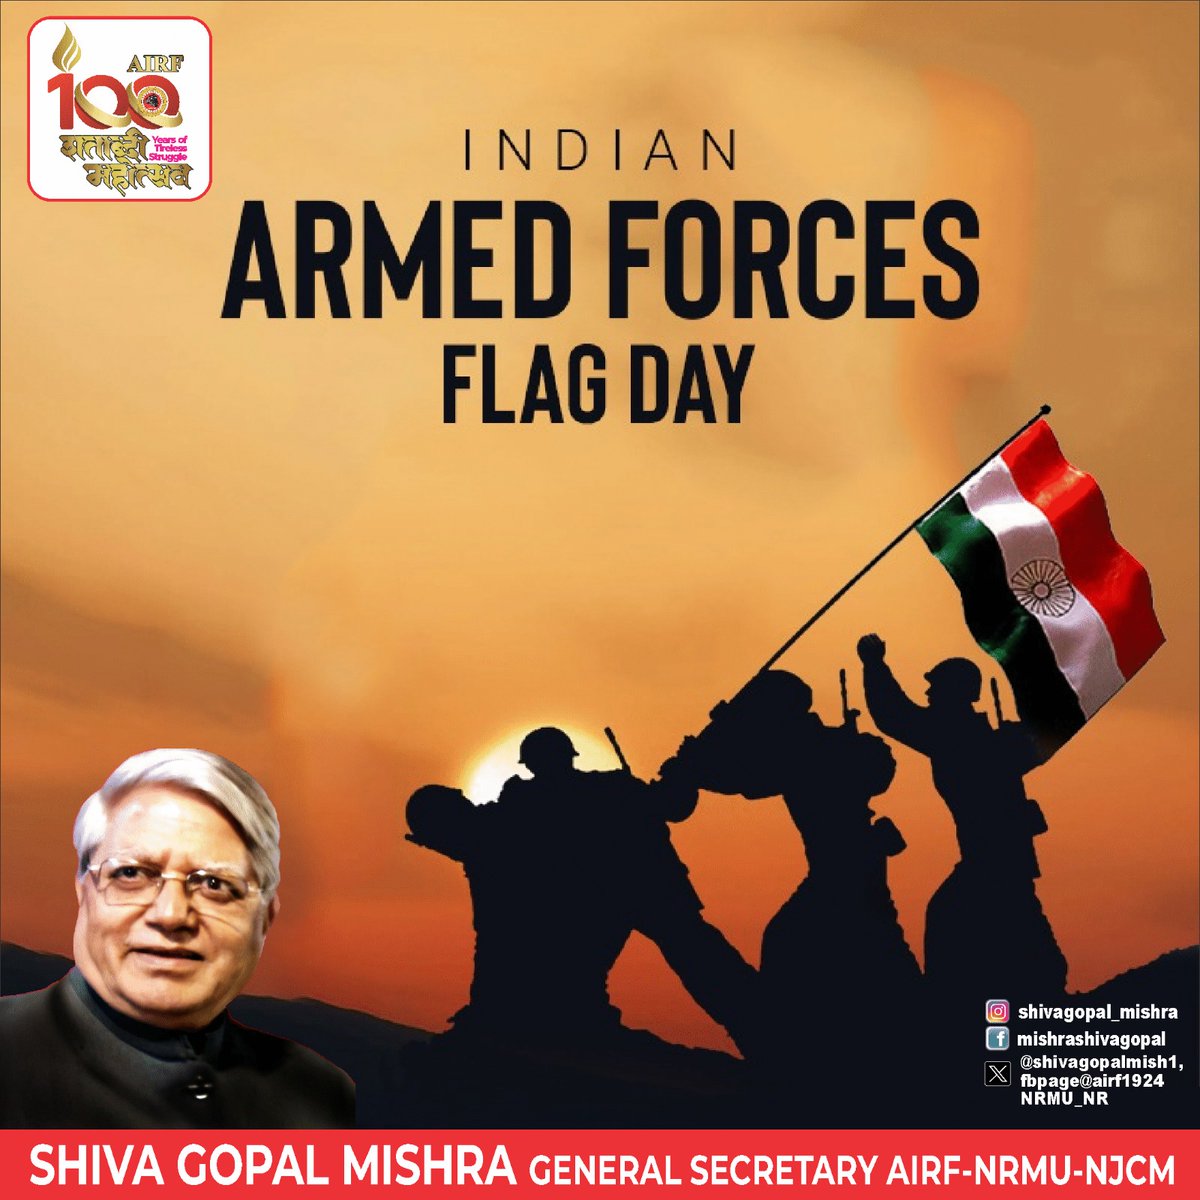 The occasion of Indian Armed Forces Flag Day reminds us all that we must thank the Indian armed forces for sacrificing their lives and comforts for us.” #indianarmedforces #indianarmy #army #railway #AIRF #NRMU #FlagDay @RailMinIndia @HqNrmu @RailwayNorthern